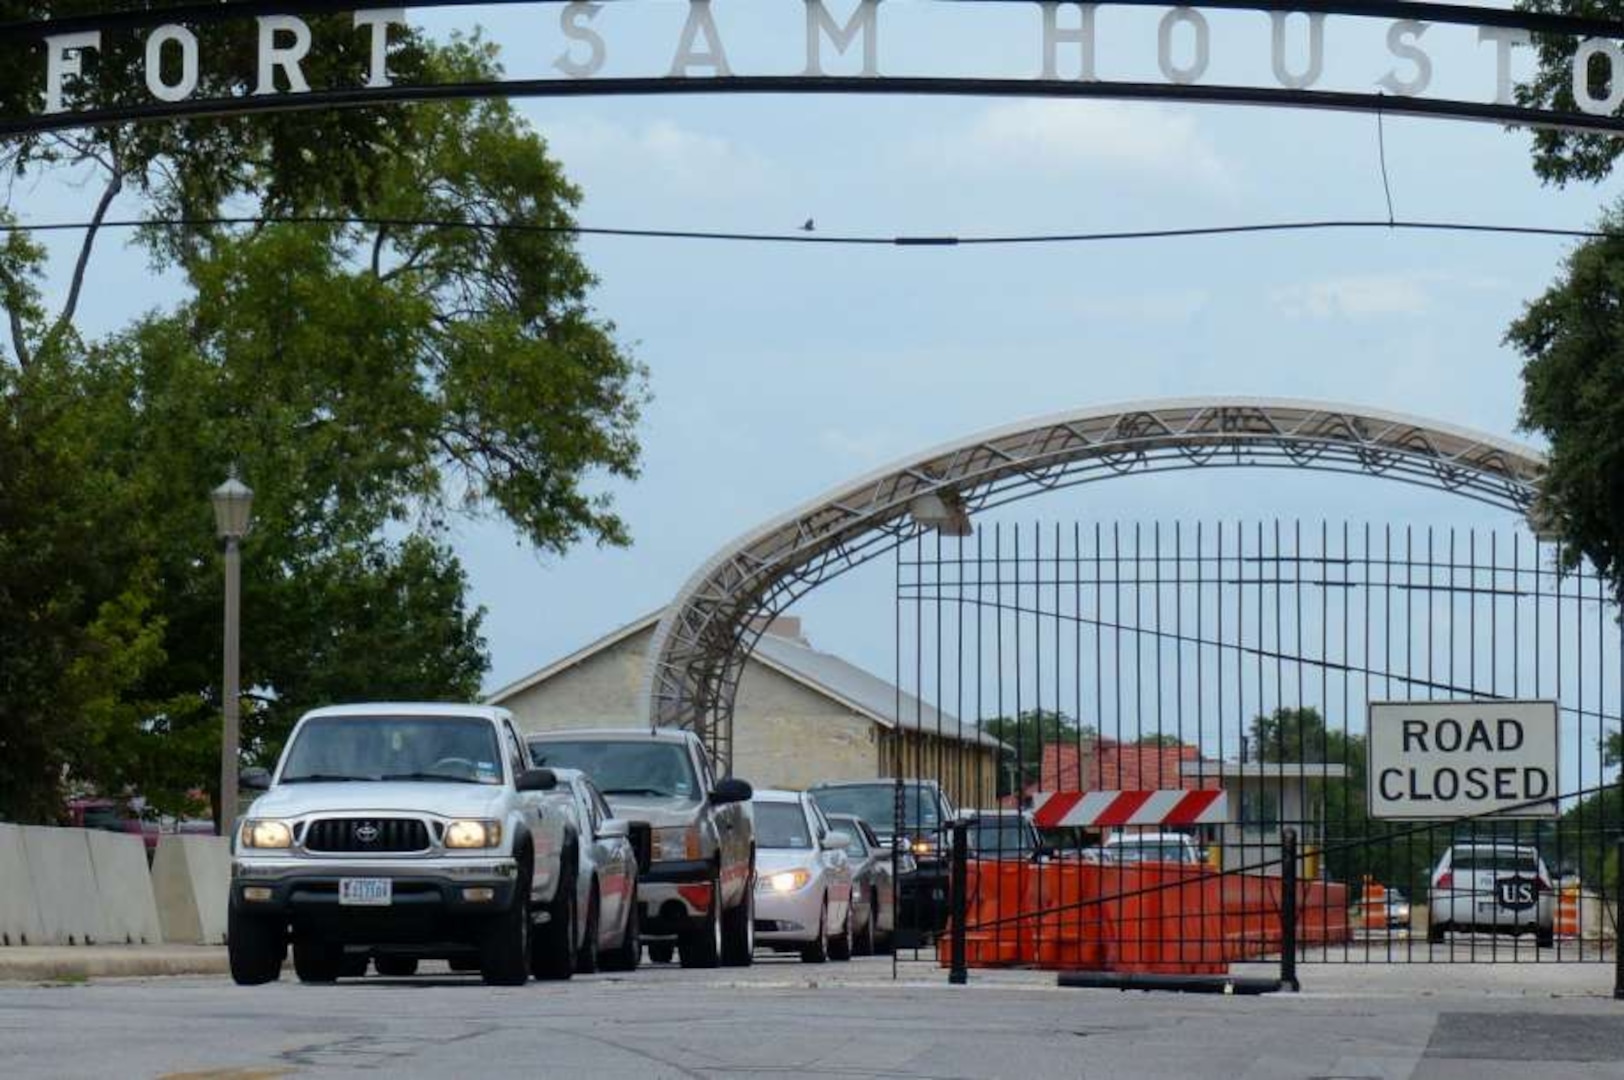 The North New Braunfels Avenue Entry Control Point at Joint Base San Antonio-Fort Sam Houston will be closed, depending on weather, for approximately three days from Thursday, June 6, to Sunday, June 9, for ballistic gate installation. During these temporary closures, the Wilson Gate will be open from 6 a.m. to 10 p.m. daily.